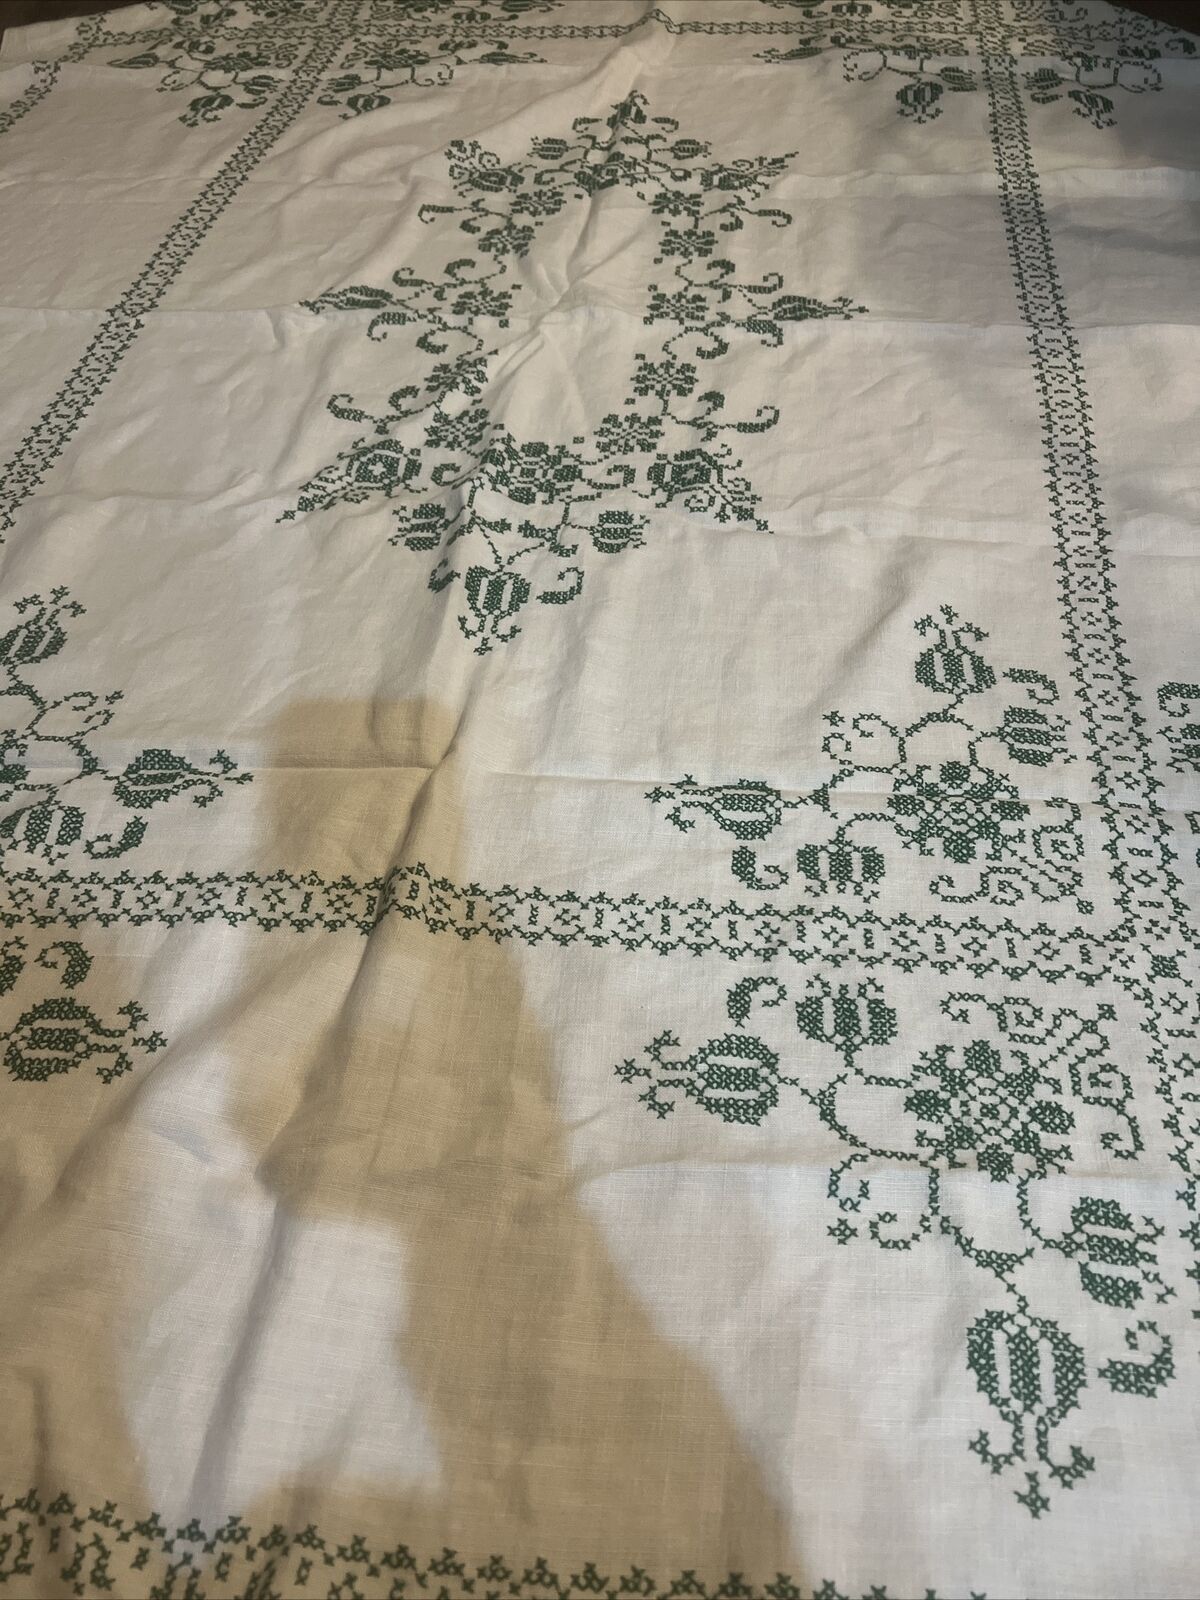 Green Handmade embroidered Rectangular Table cloth 56” x 74”100% cotton Unique